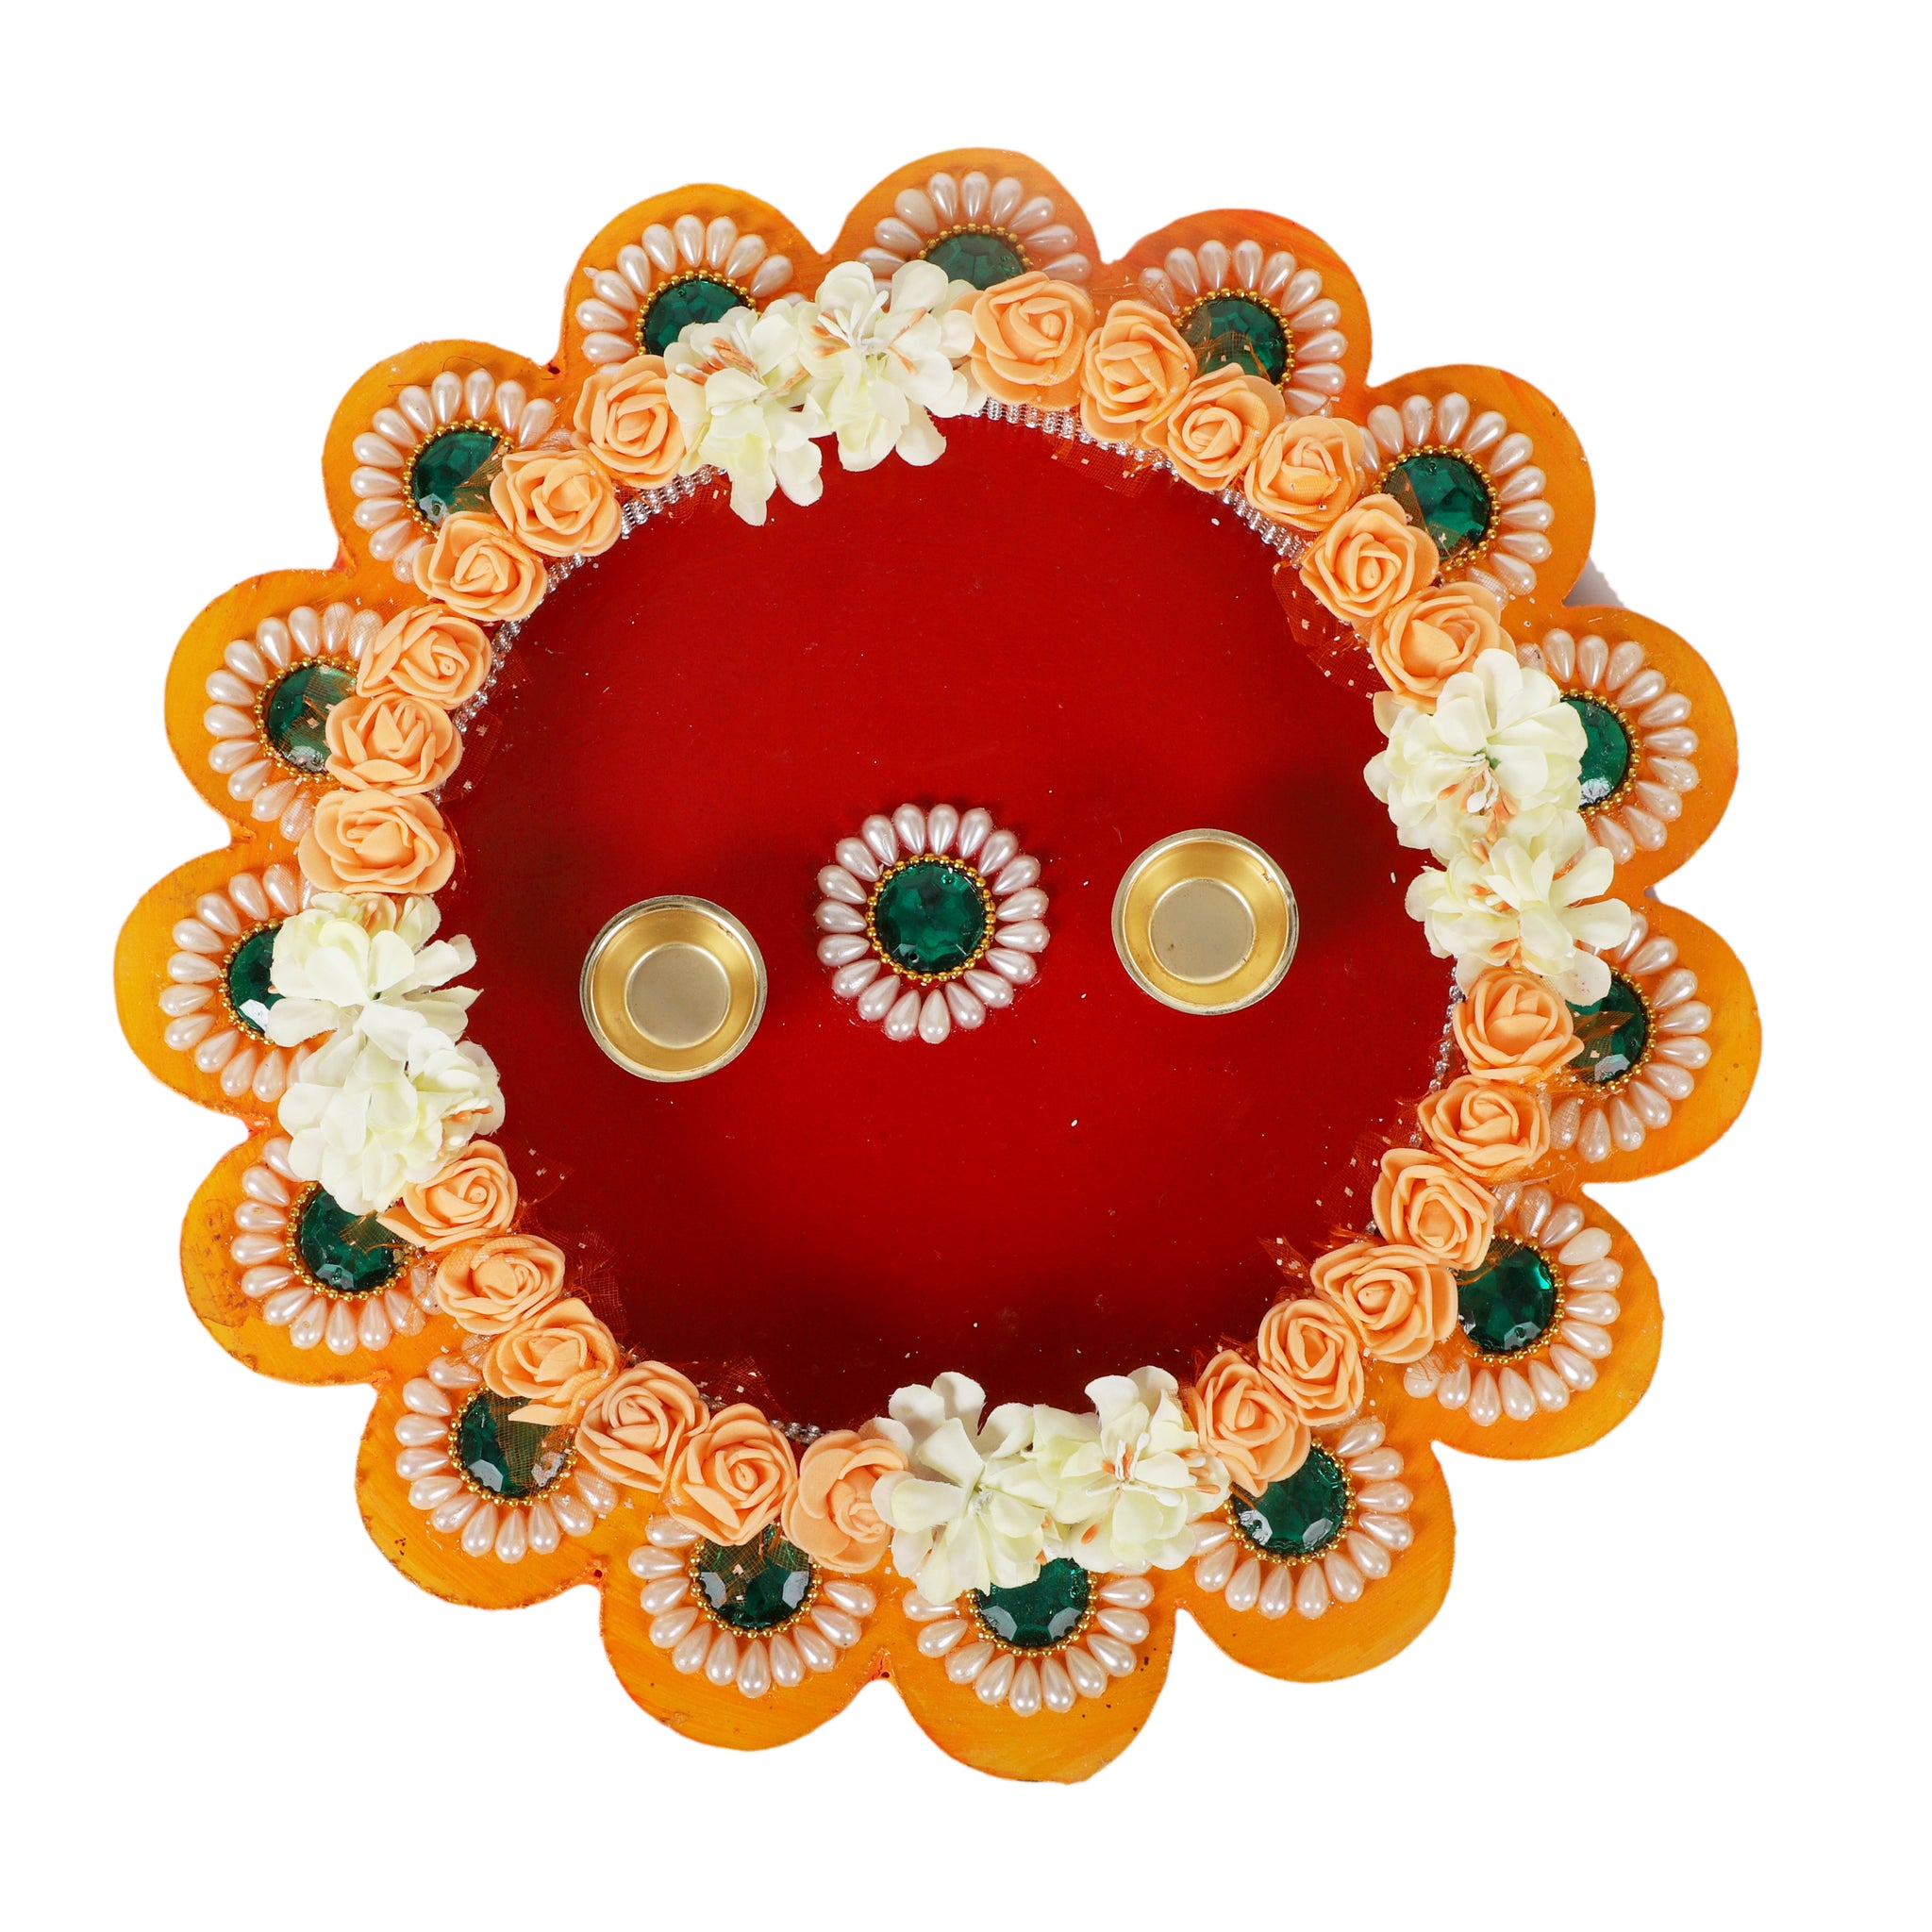 Puja Article, Buy Puja Item online, Pooja Essentials for Home and Temple